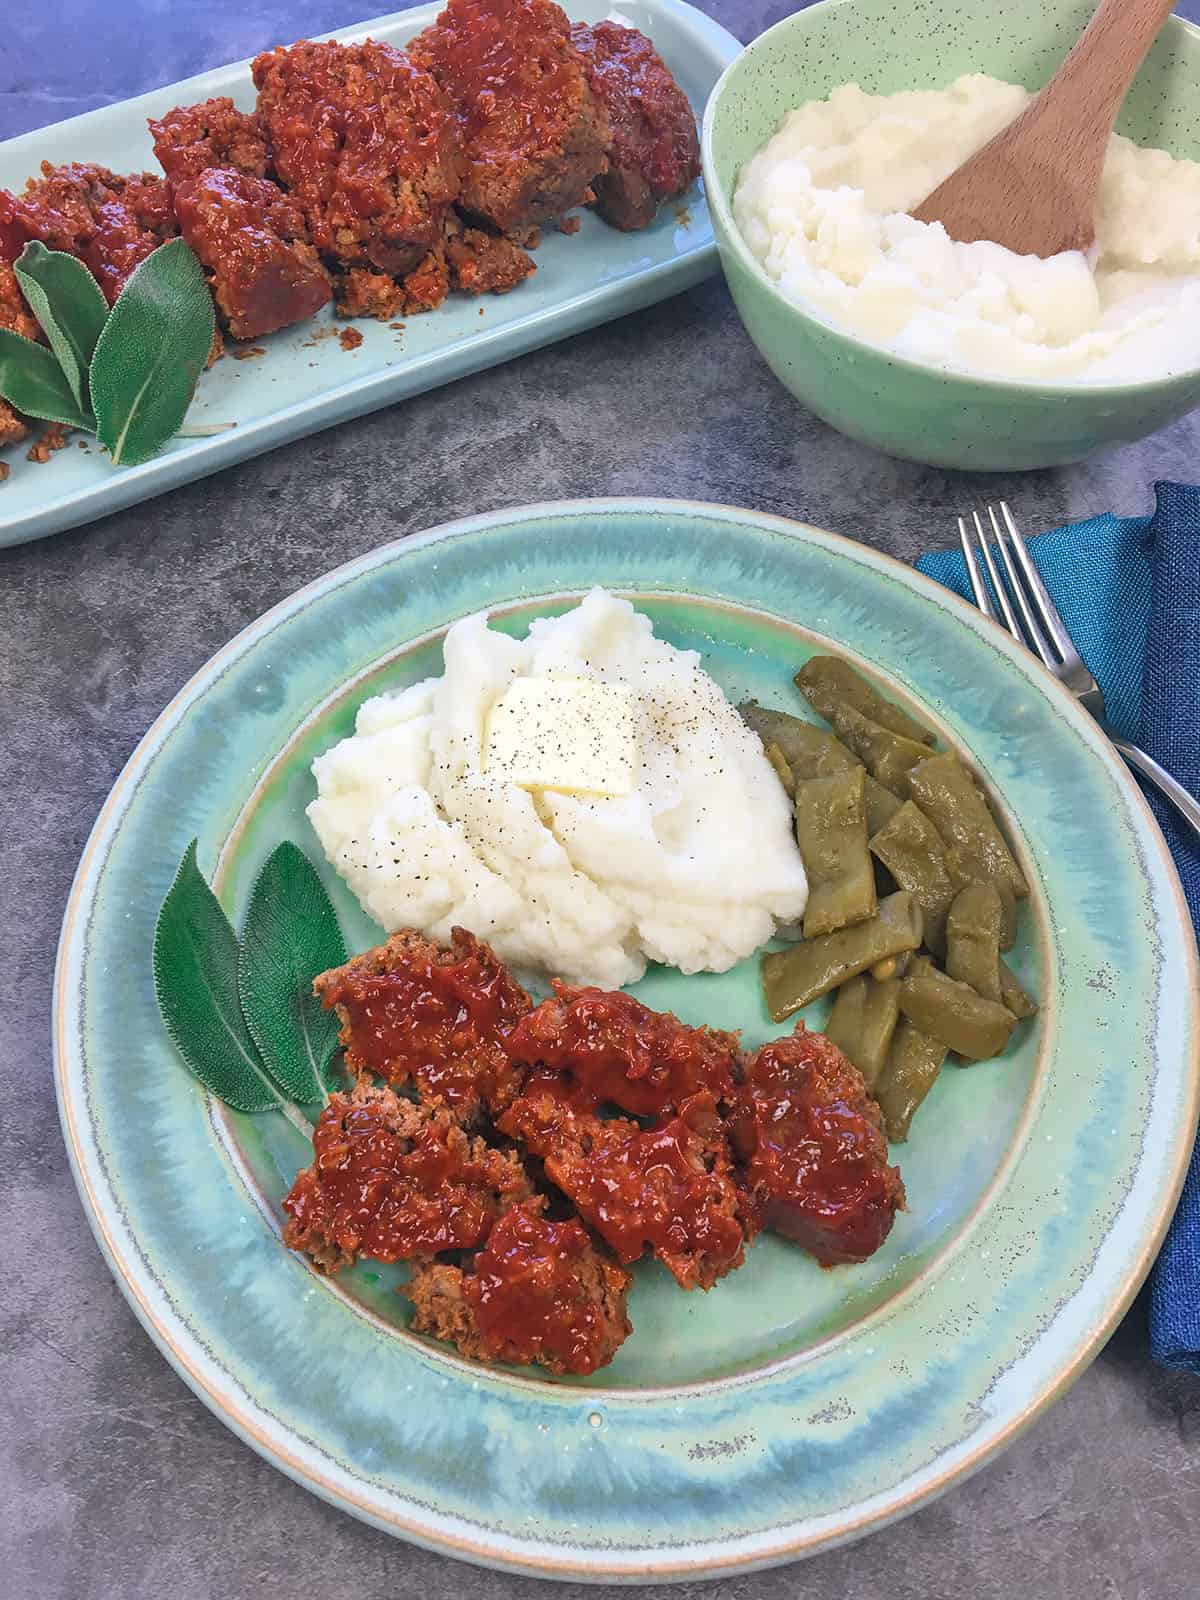 Sliced meatloaf on teal blue plate with a serving of mashed potatoes and green beans on the side.